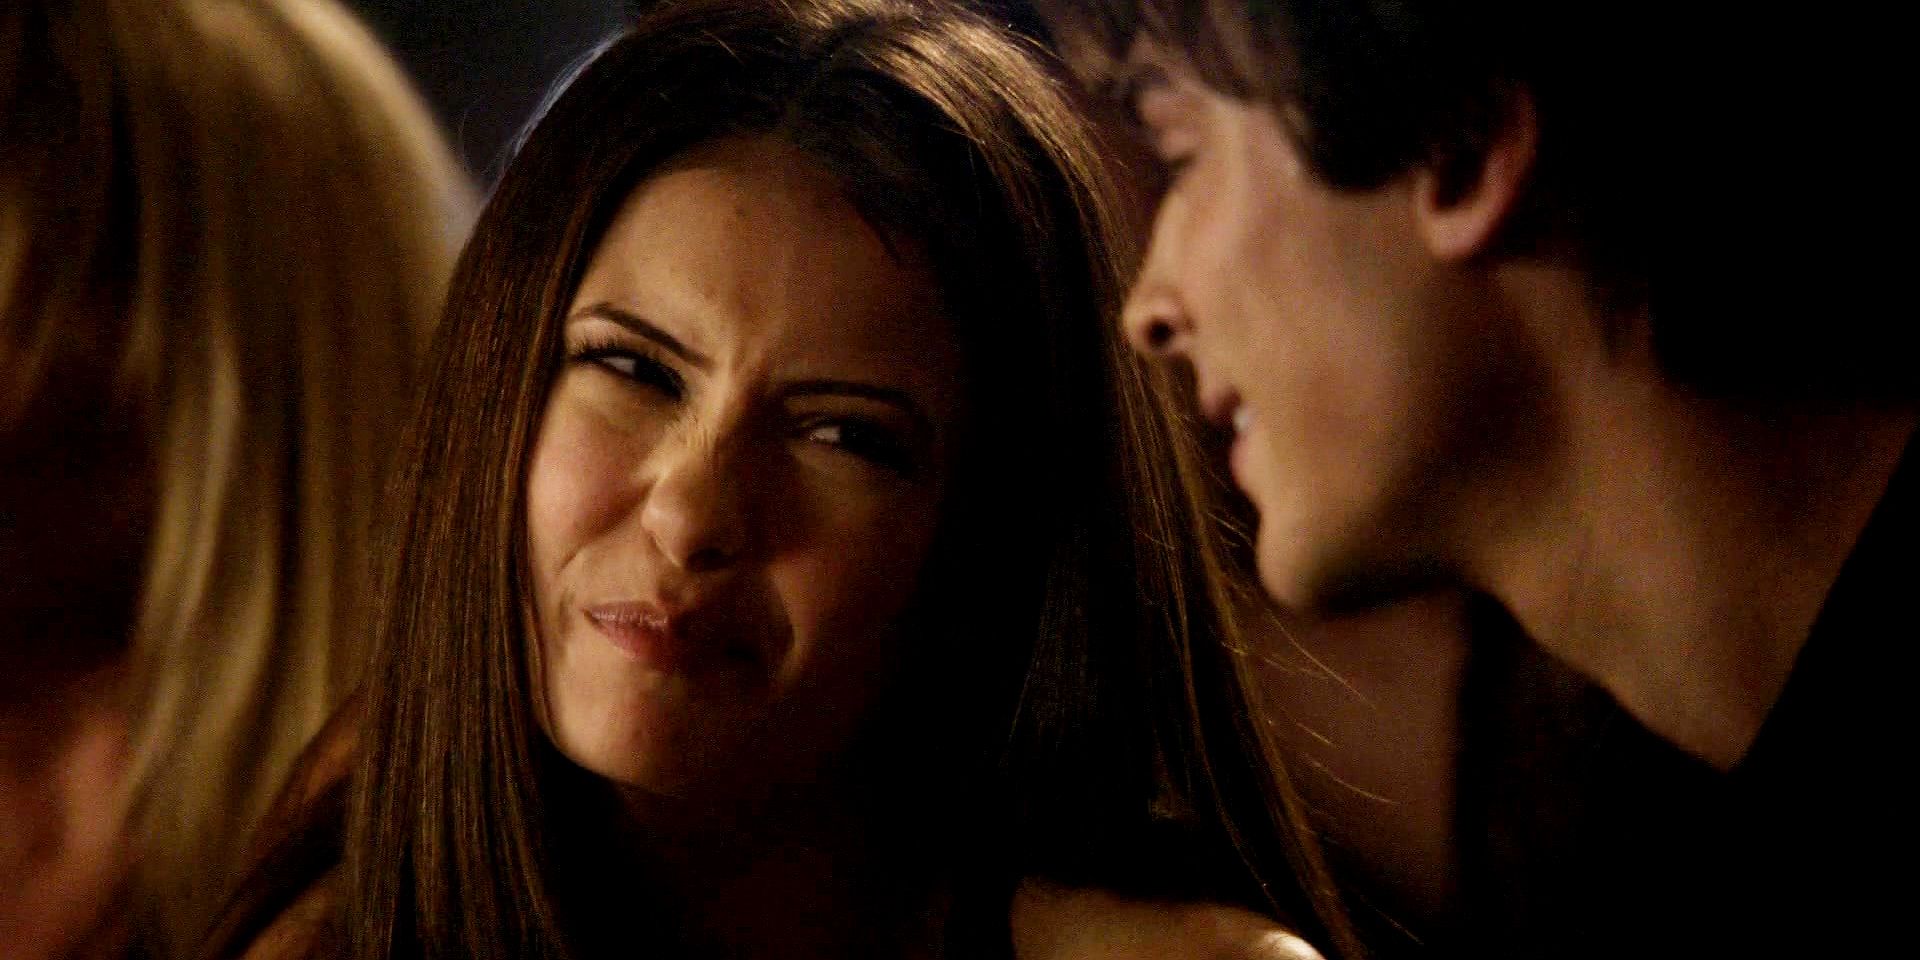 Elena at the bar making fun of Damon for being able to drink more than him in The Vampire Diaries.